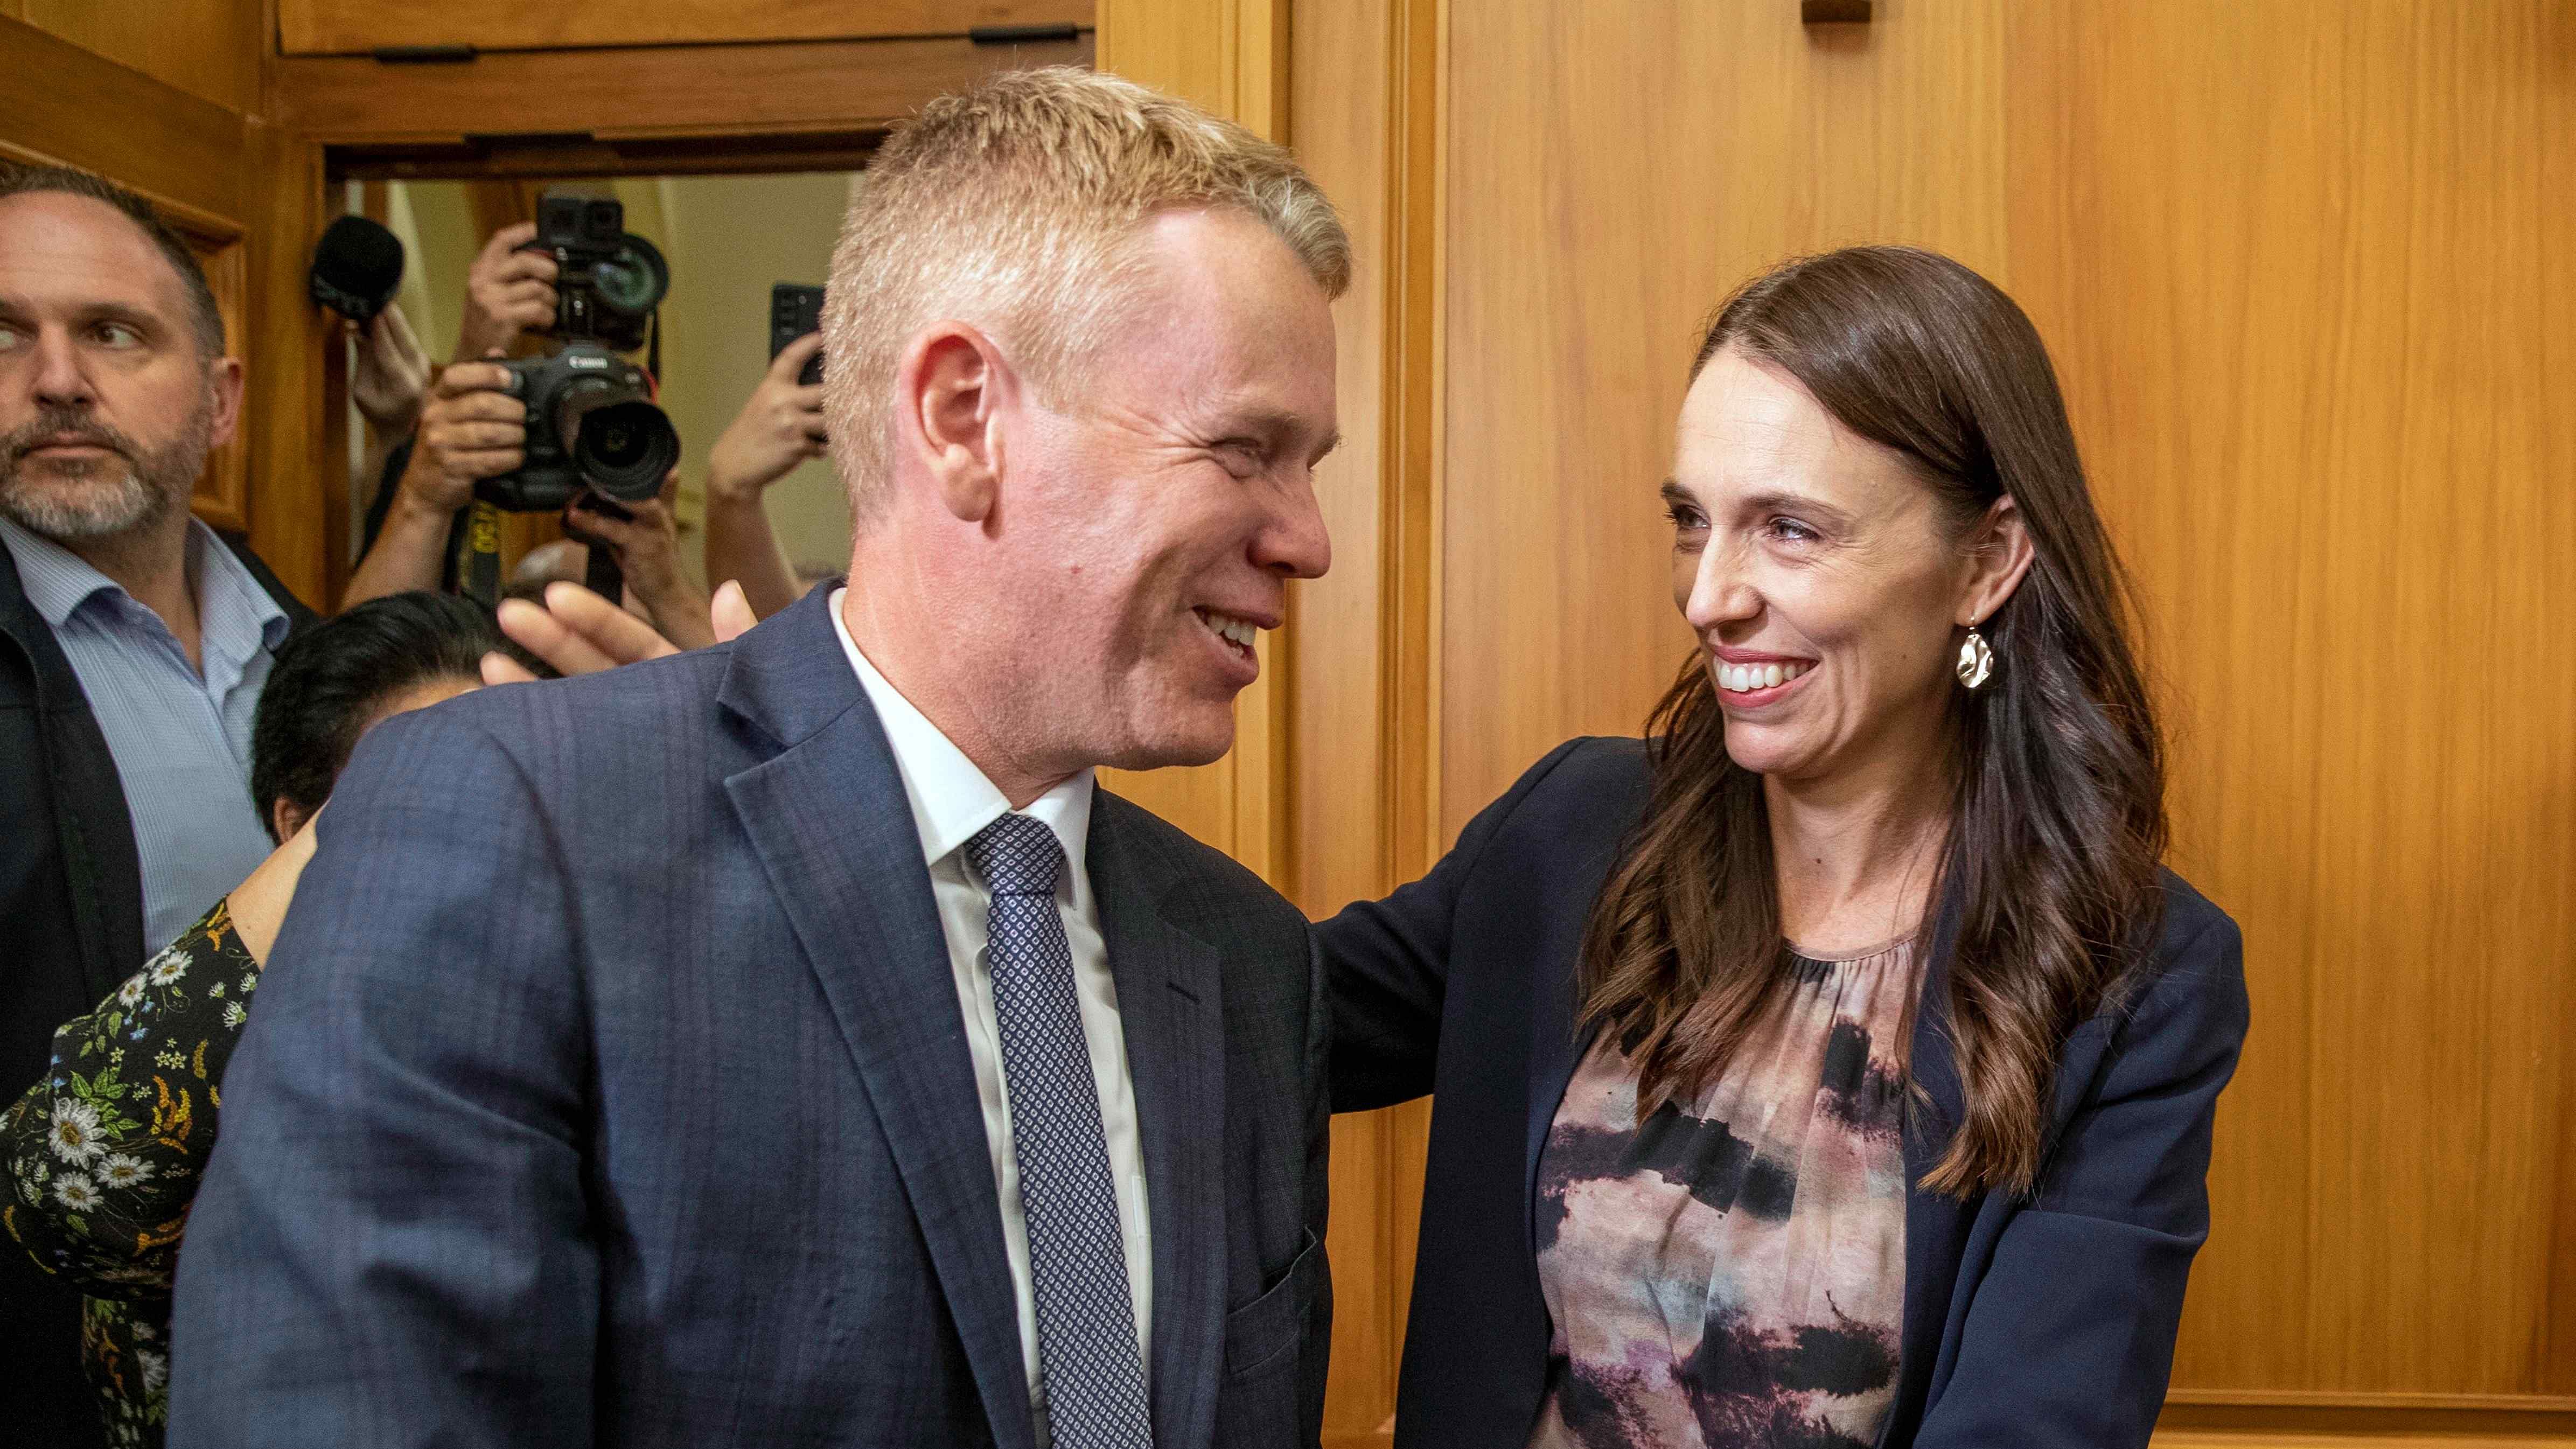 New Zealand Prime Minister Jacinda Ardern, right, and new Labour Party leader Chris Hipkins arrive for their caucus vote at Parliament in Wellington. Credit: AP Photo